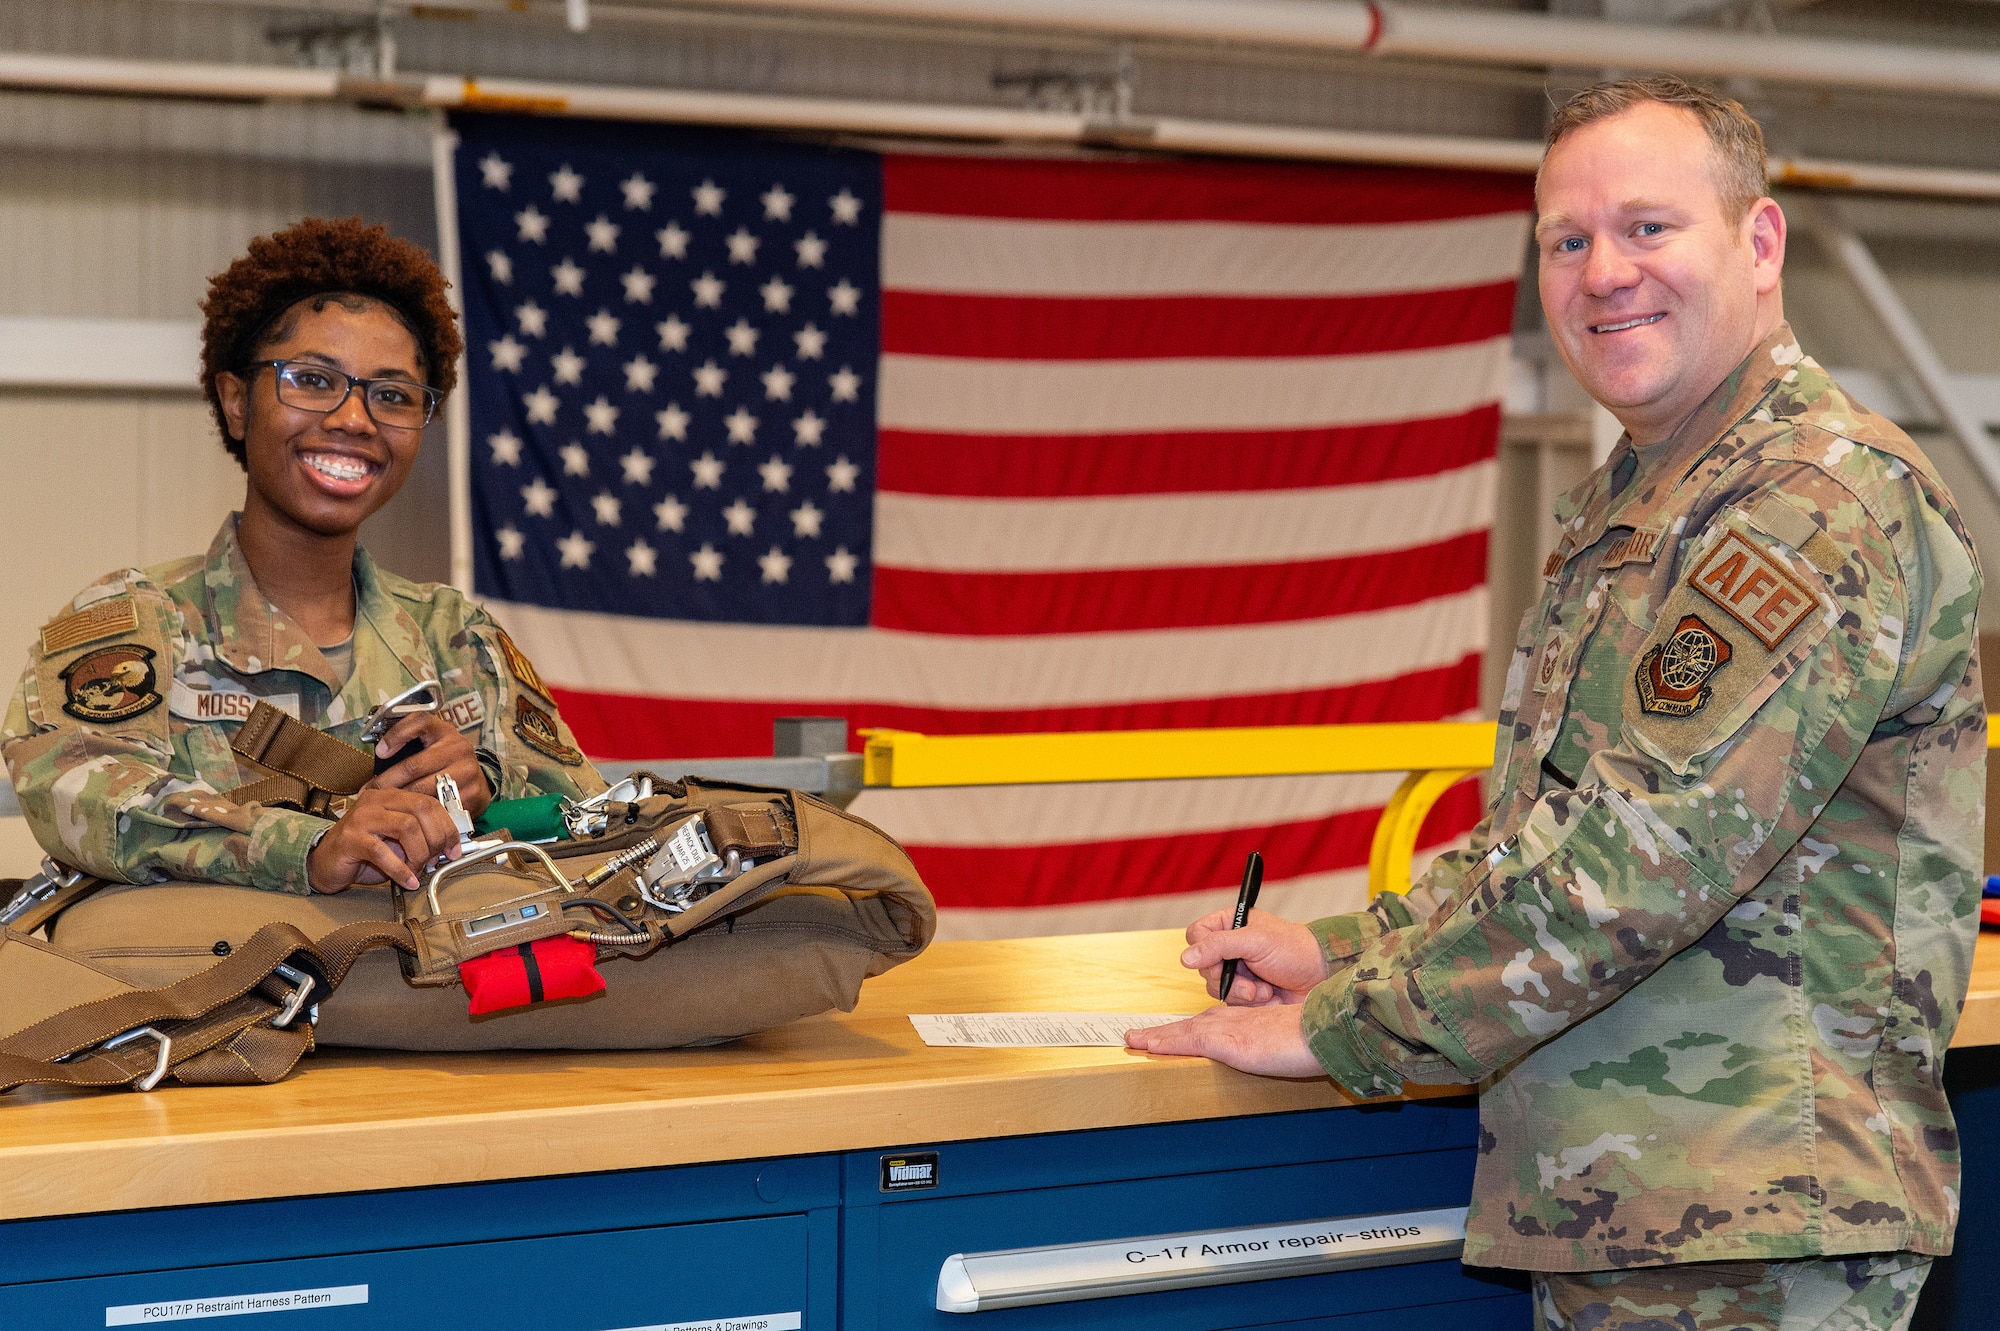 U.S. Air Force Airman 1st Class Faith Moss, left, 436th Operations Support Squadron aircrew flight equipment journeyman, and U.S. Air Force Senior Master Sgt. Christopher Smith, 436th OSS AFE superintendent, inspect a parachute at Dover Air Force Base, Delaware, March 12, 2024. Moss was recognized as the 2023 Air Mobility Command Outstanding AFE Airman of the Year, and Smith was the 2023 AMC Outstanding AFE Senior Noncommissioned Officer of the Year. (U.S. Air Force photo by Roland Balik)